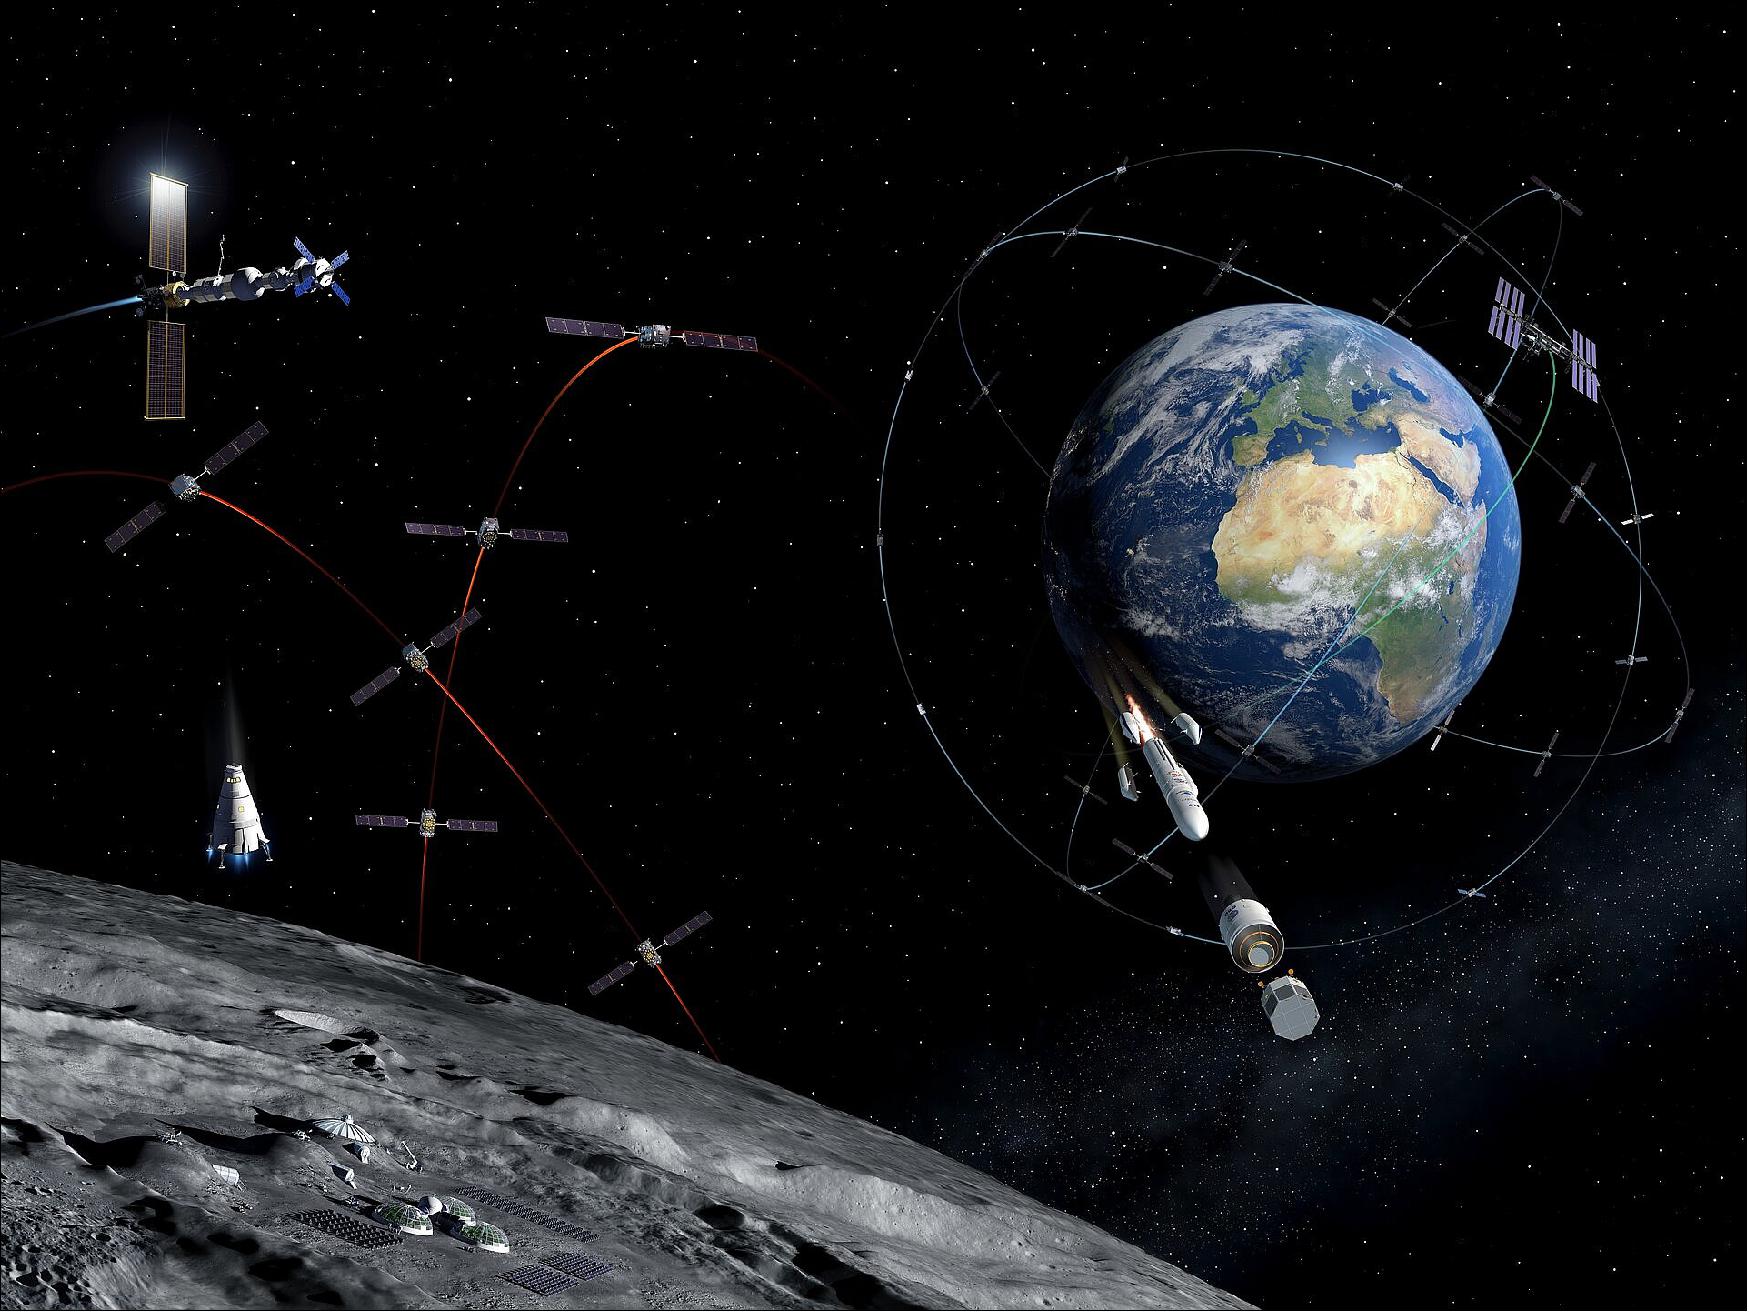 Figure 12: Extending satnav to the Moon. Terrestrial satnav can in principle be used to perform satnav fixes in lunar orbit. Then as a next step, as part of the Moonlight initiative, dedicated lunar satellites and surface beacons in regions of interest would increase the precision of satnav fixes, allowing reliable surface navigation and landing guidance (image credit: ESA)